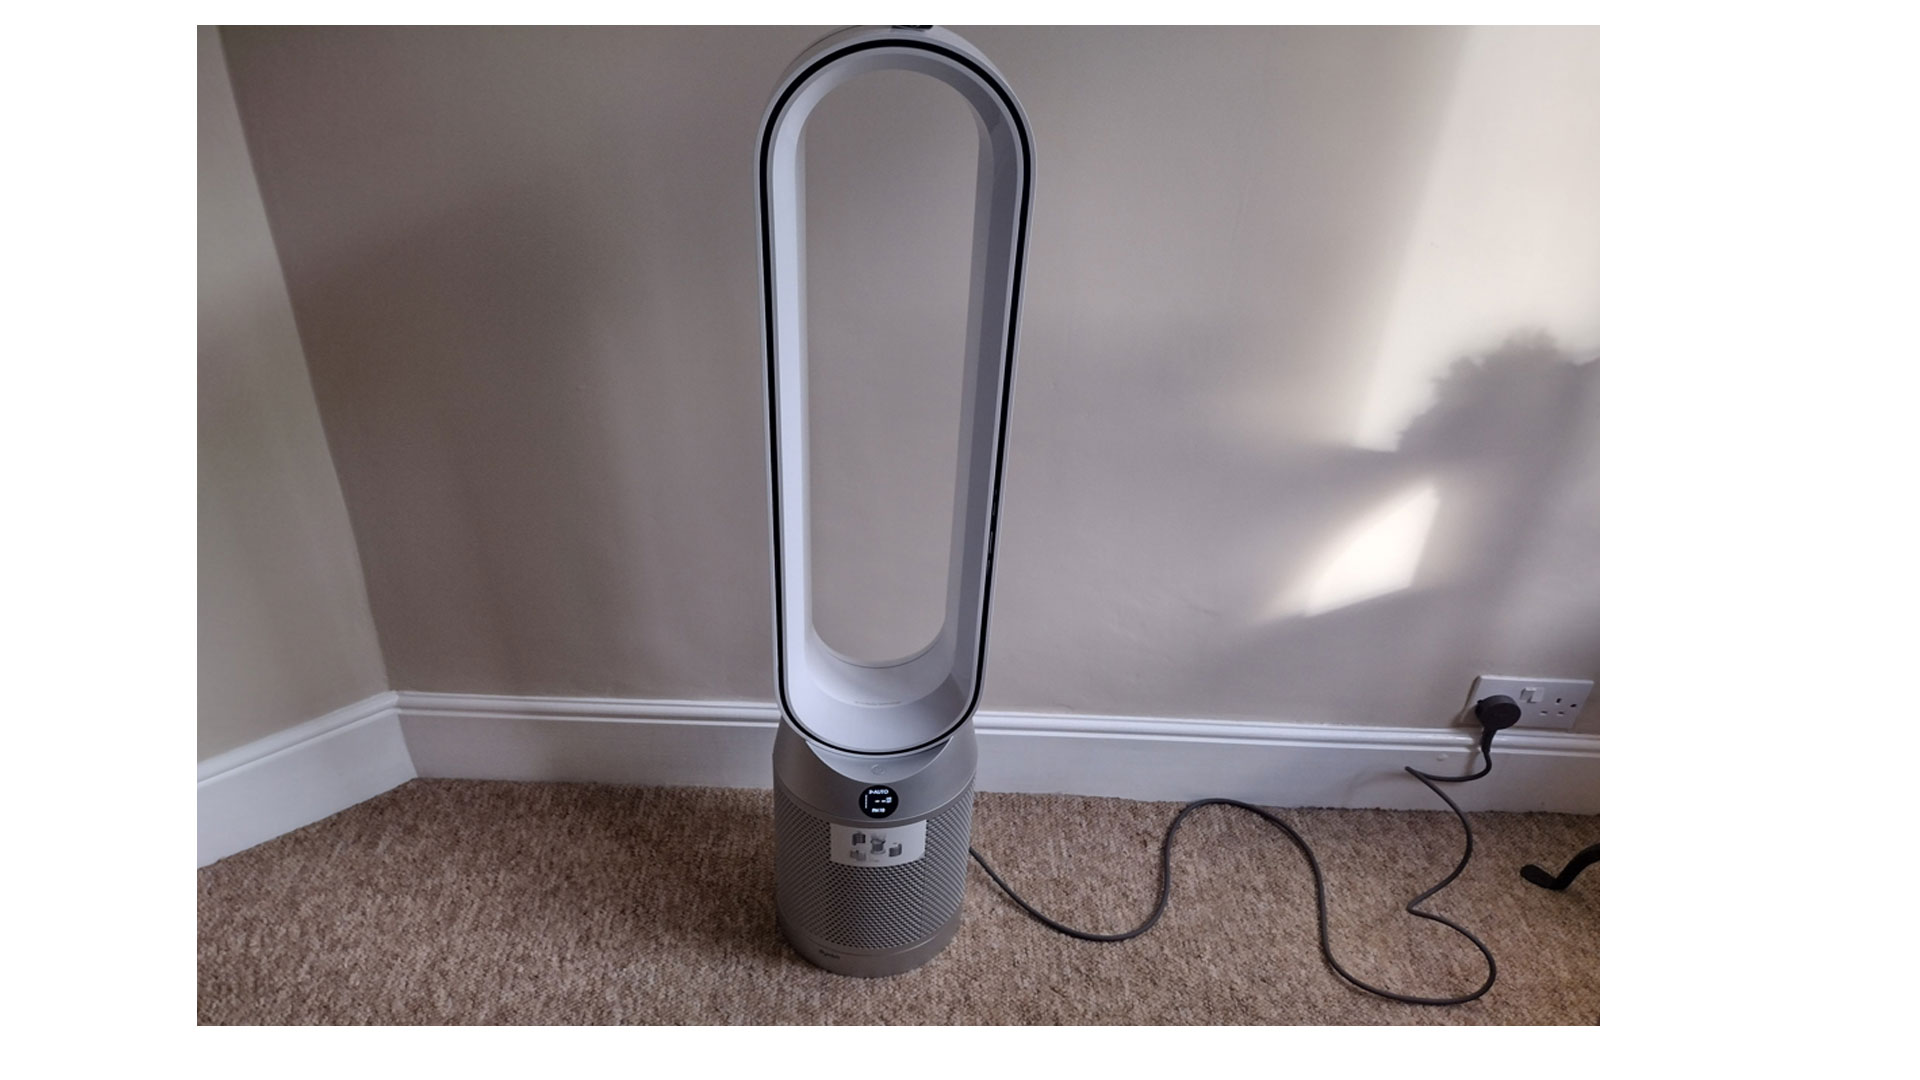 Dyson Purifier Cool: Image shows the air purifier and its power cord.